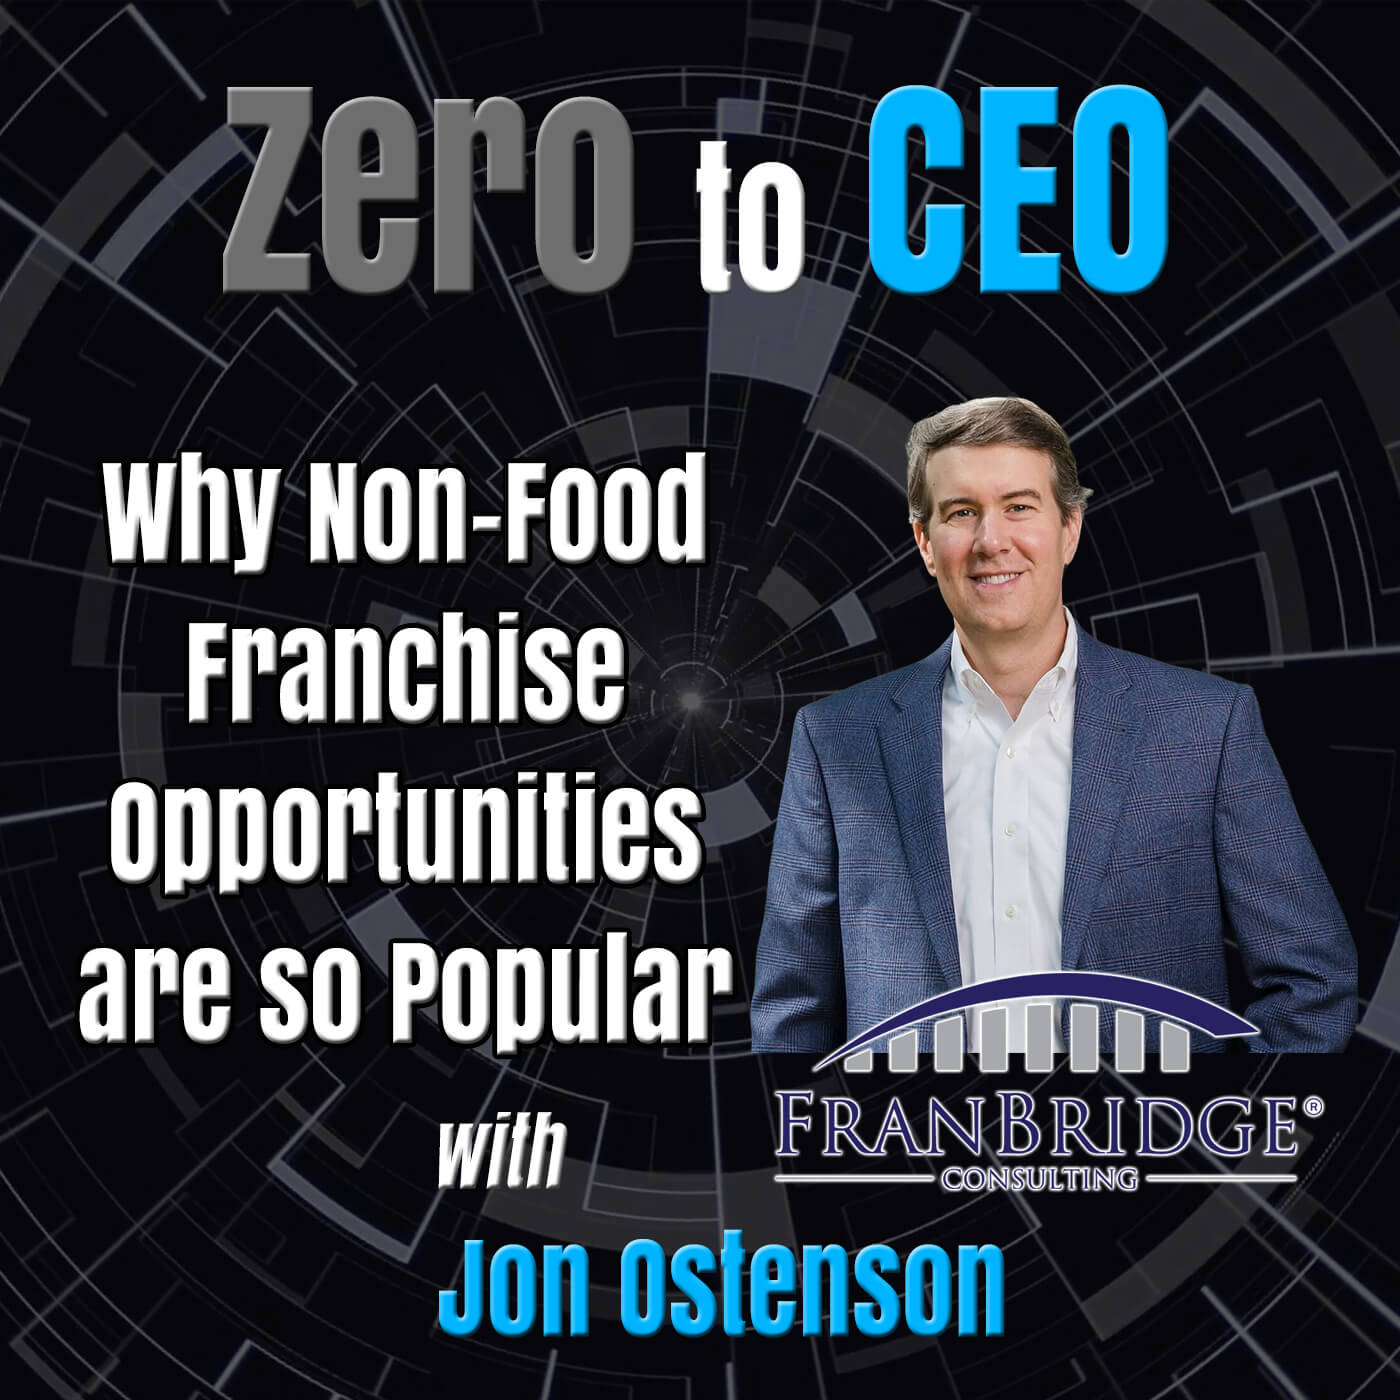 Zero to CEO: Why Non-Food Franchise Opportunities are so Popular with Jon Ostenson